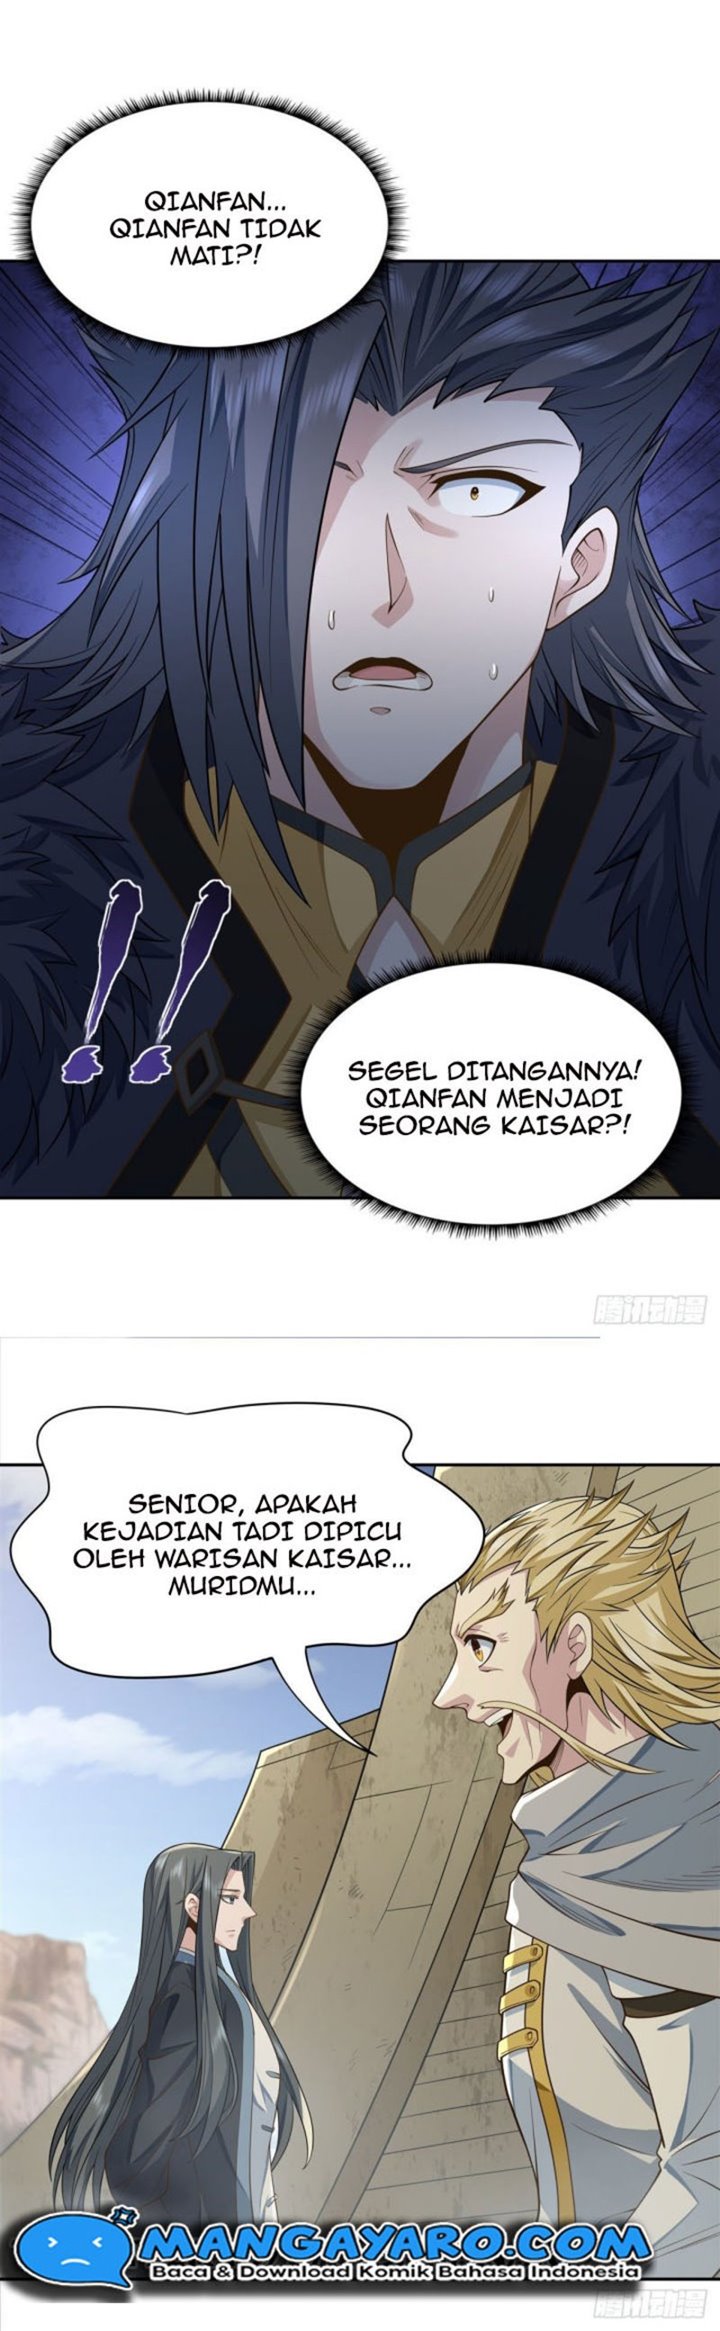 Dilarang COPAS - situs resmi www.mangacanblog.com - Komik my female apprentices are all big shots from the future 014 - chapter 14 15 Indonesia my female apprentices are all big shots from the future 014 - chapter 14 Terbaru 20|Baca Manga Komik Indonesia|Mangacan